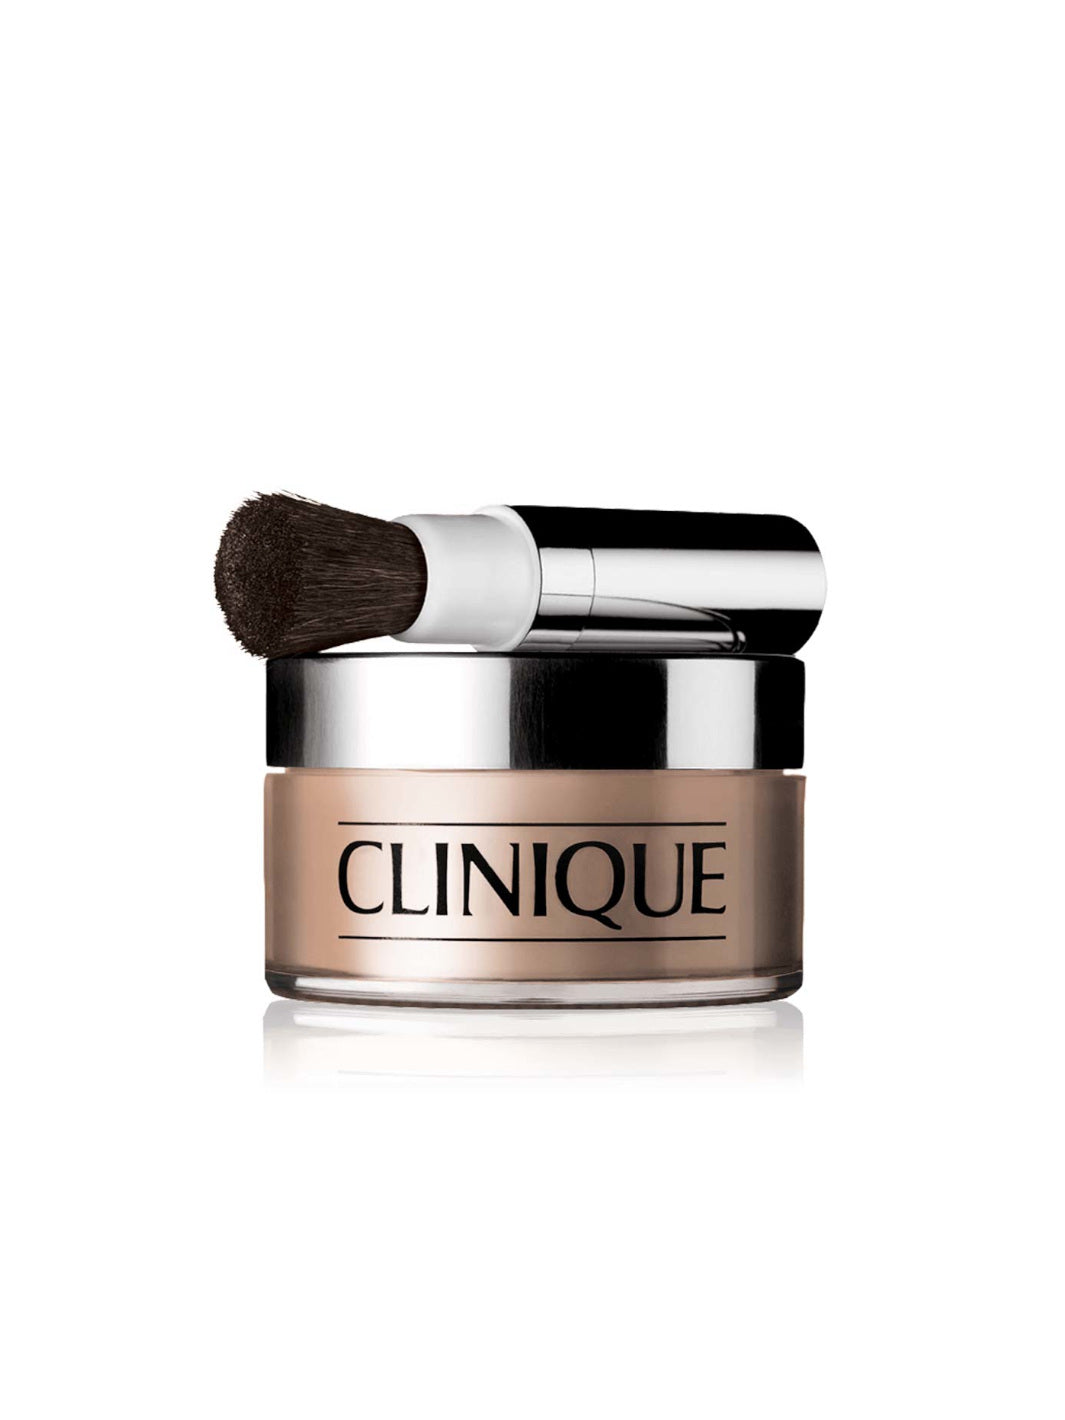 Clinique Blended face powder and brush 